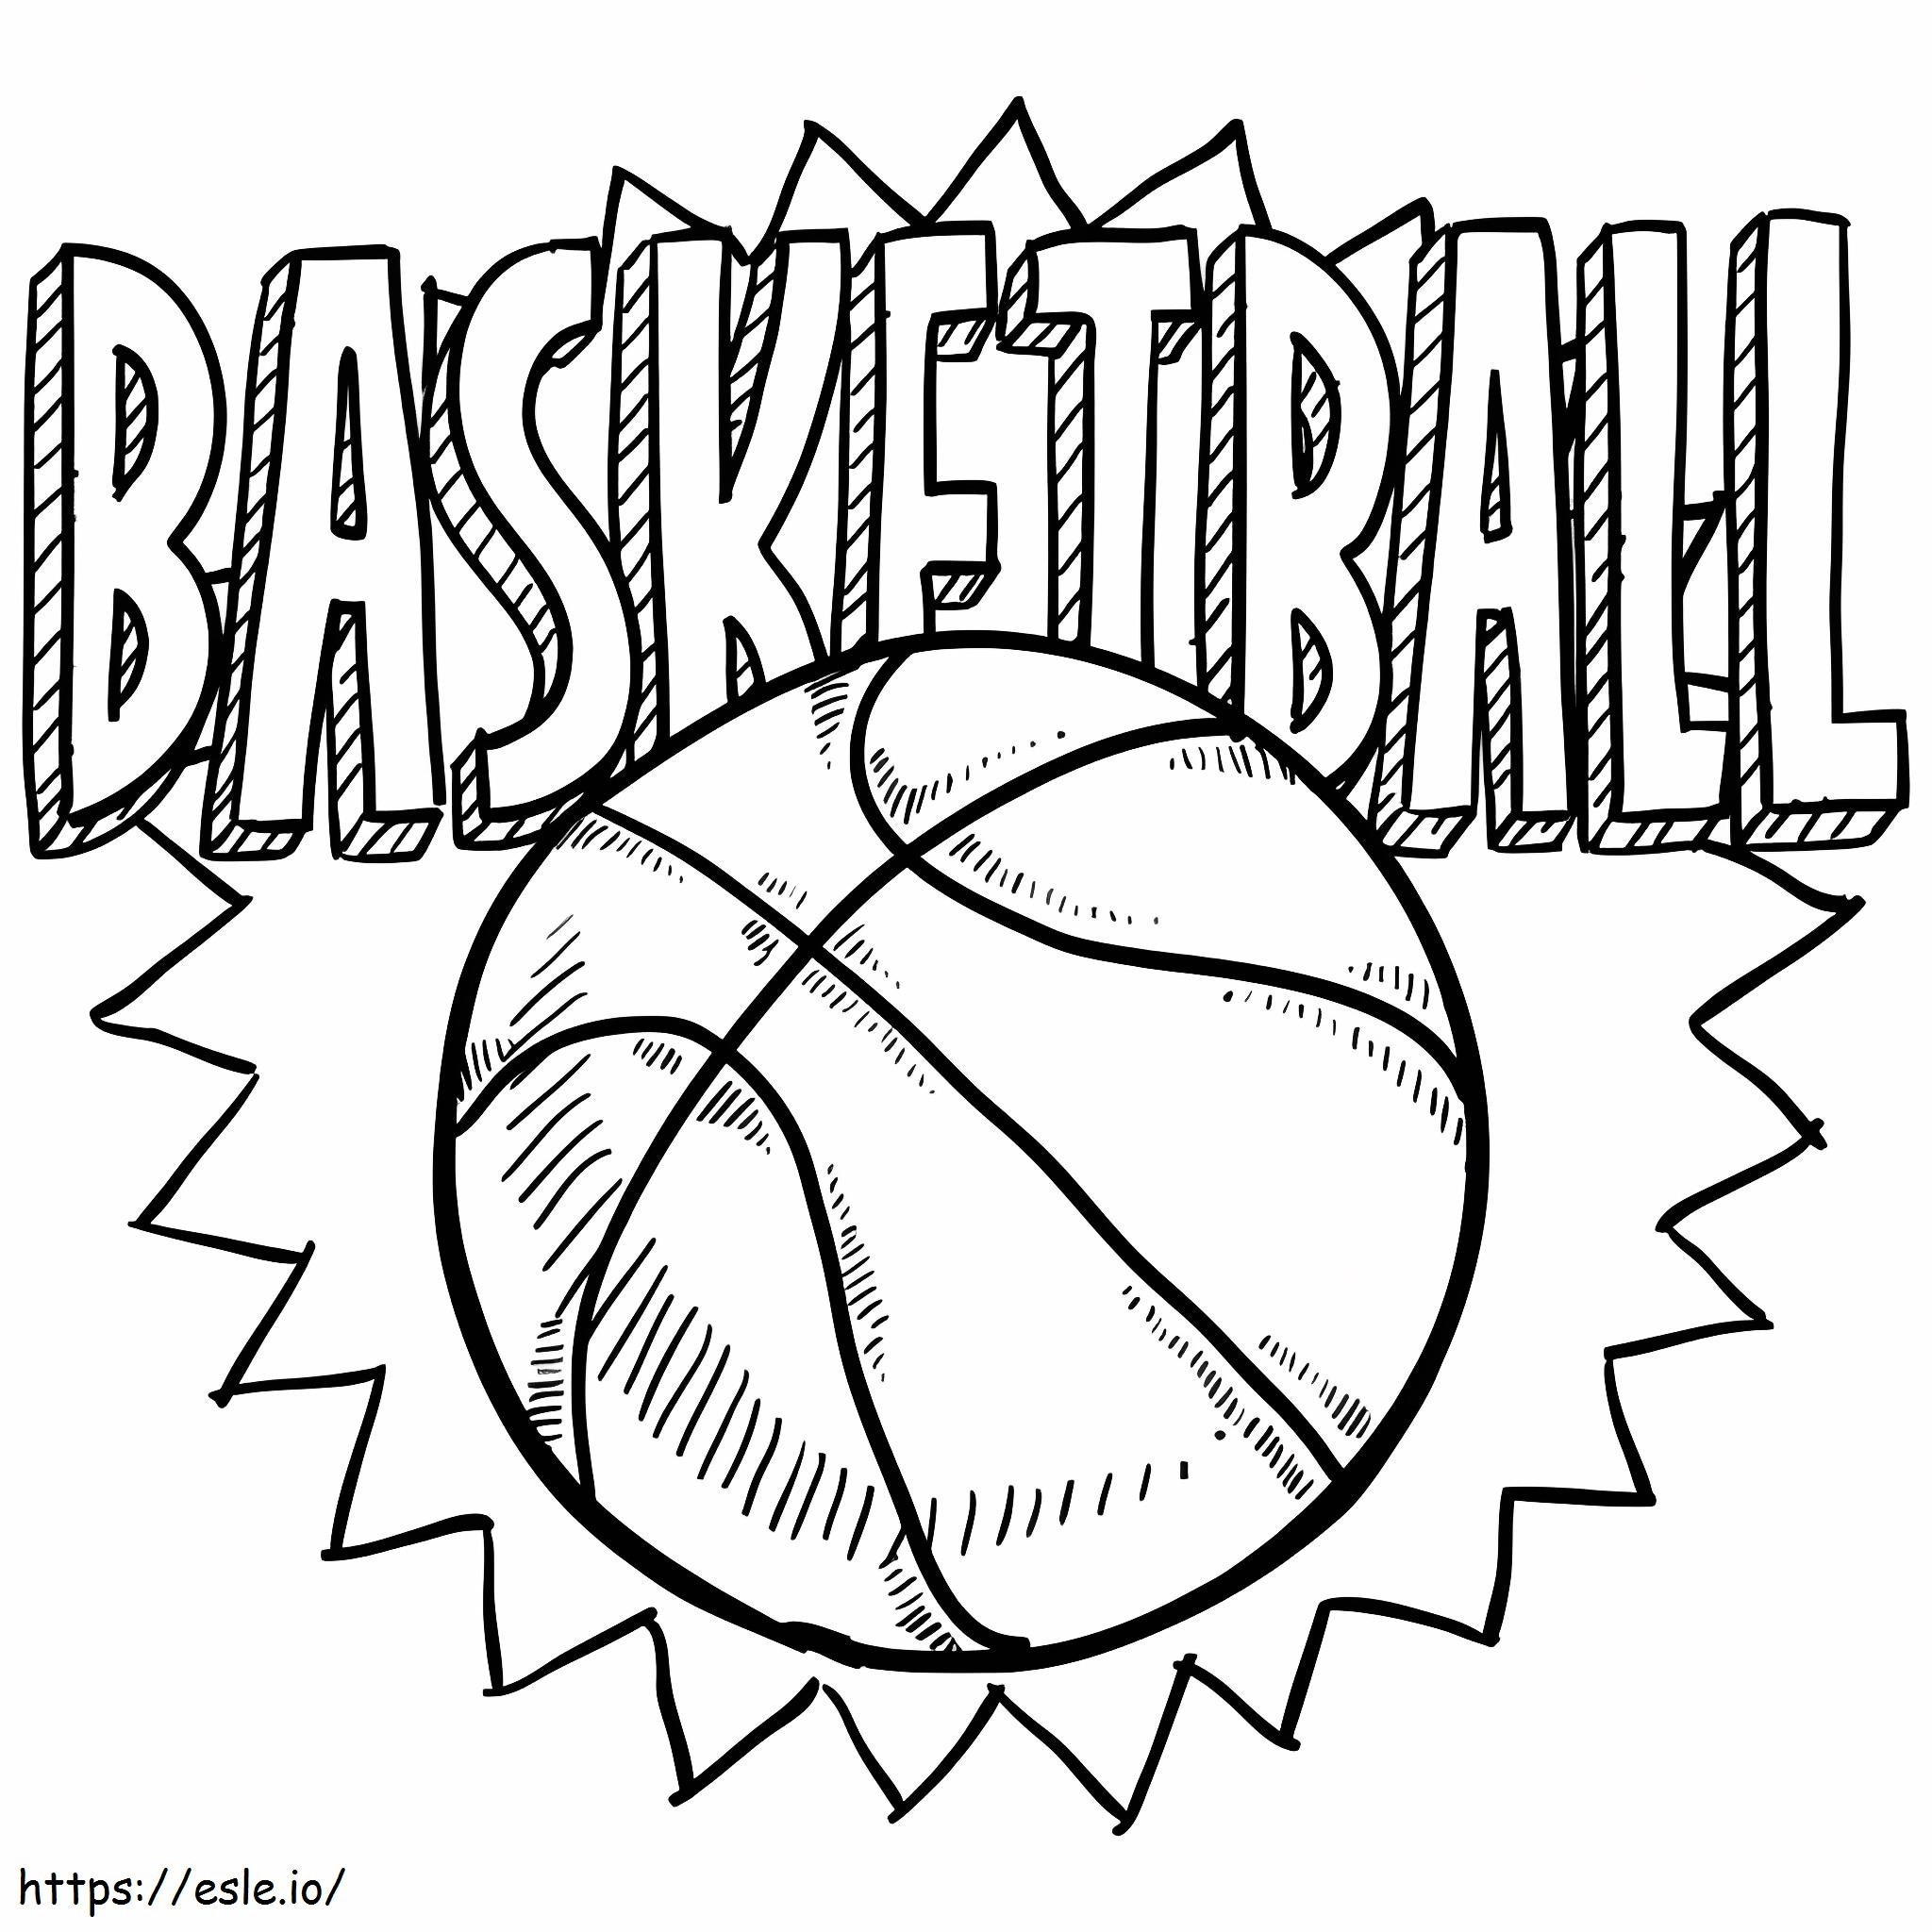 1559608582 Basketball A4 coloring page